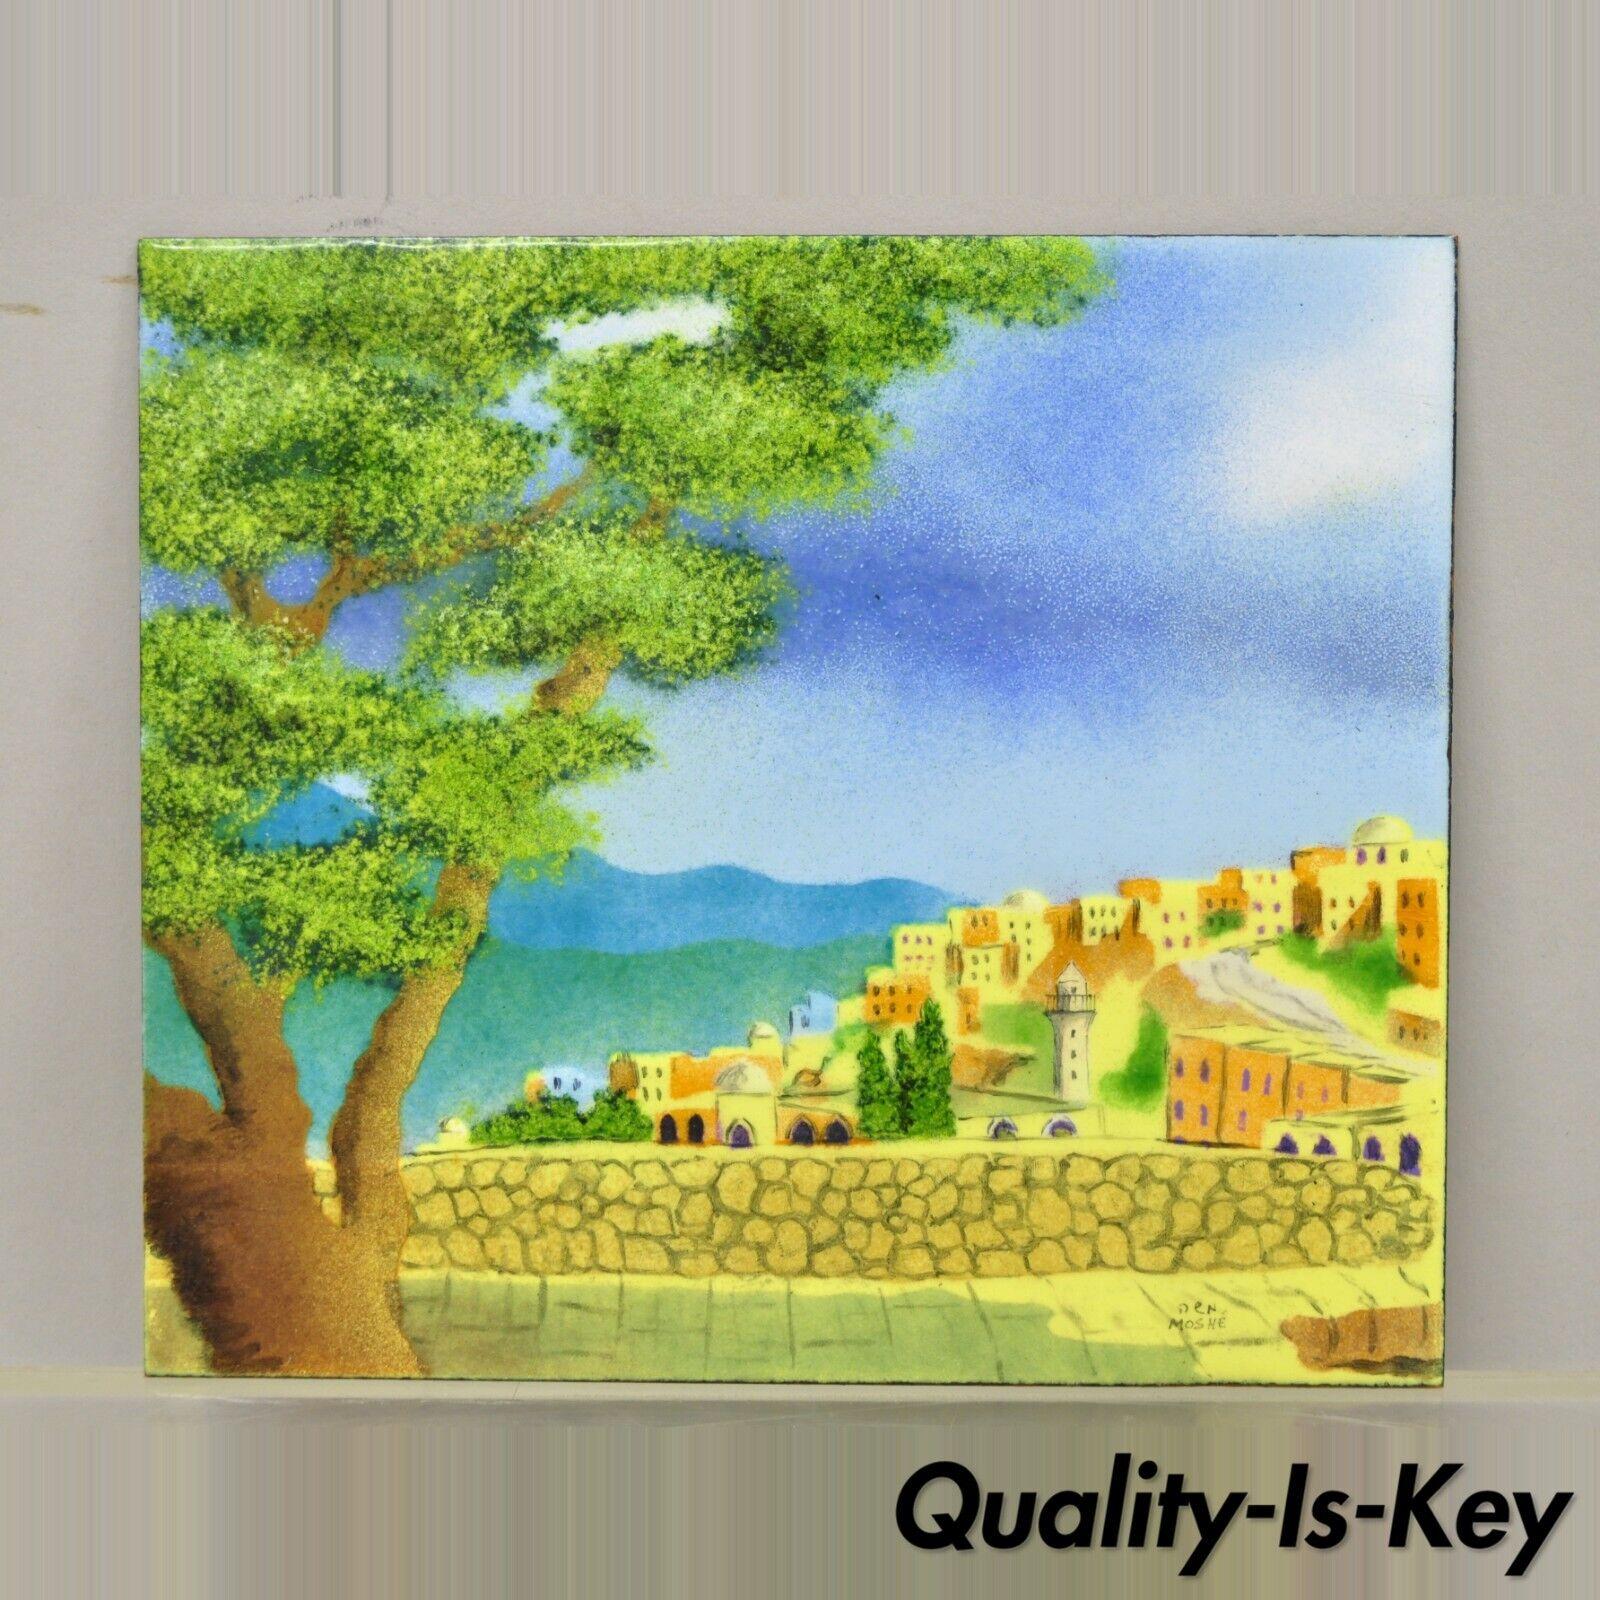 Den Moshe signed enamel on copper small painting yellow countryside 7 x 8 Art. Item features enamel on copper painting, artist signature to bottom right corner, beautiful subject and color, unframed. Circa late 20th century. Measurements: 7